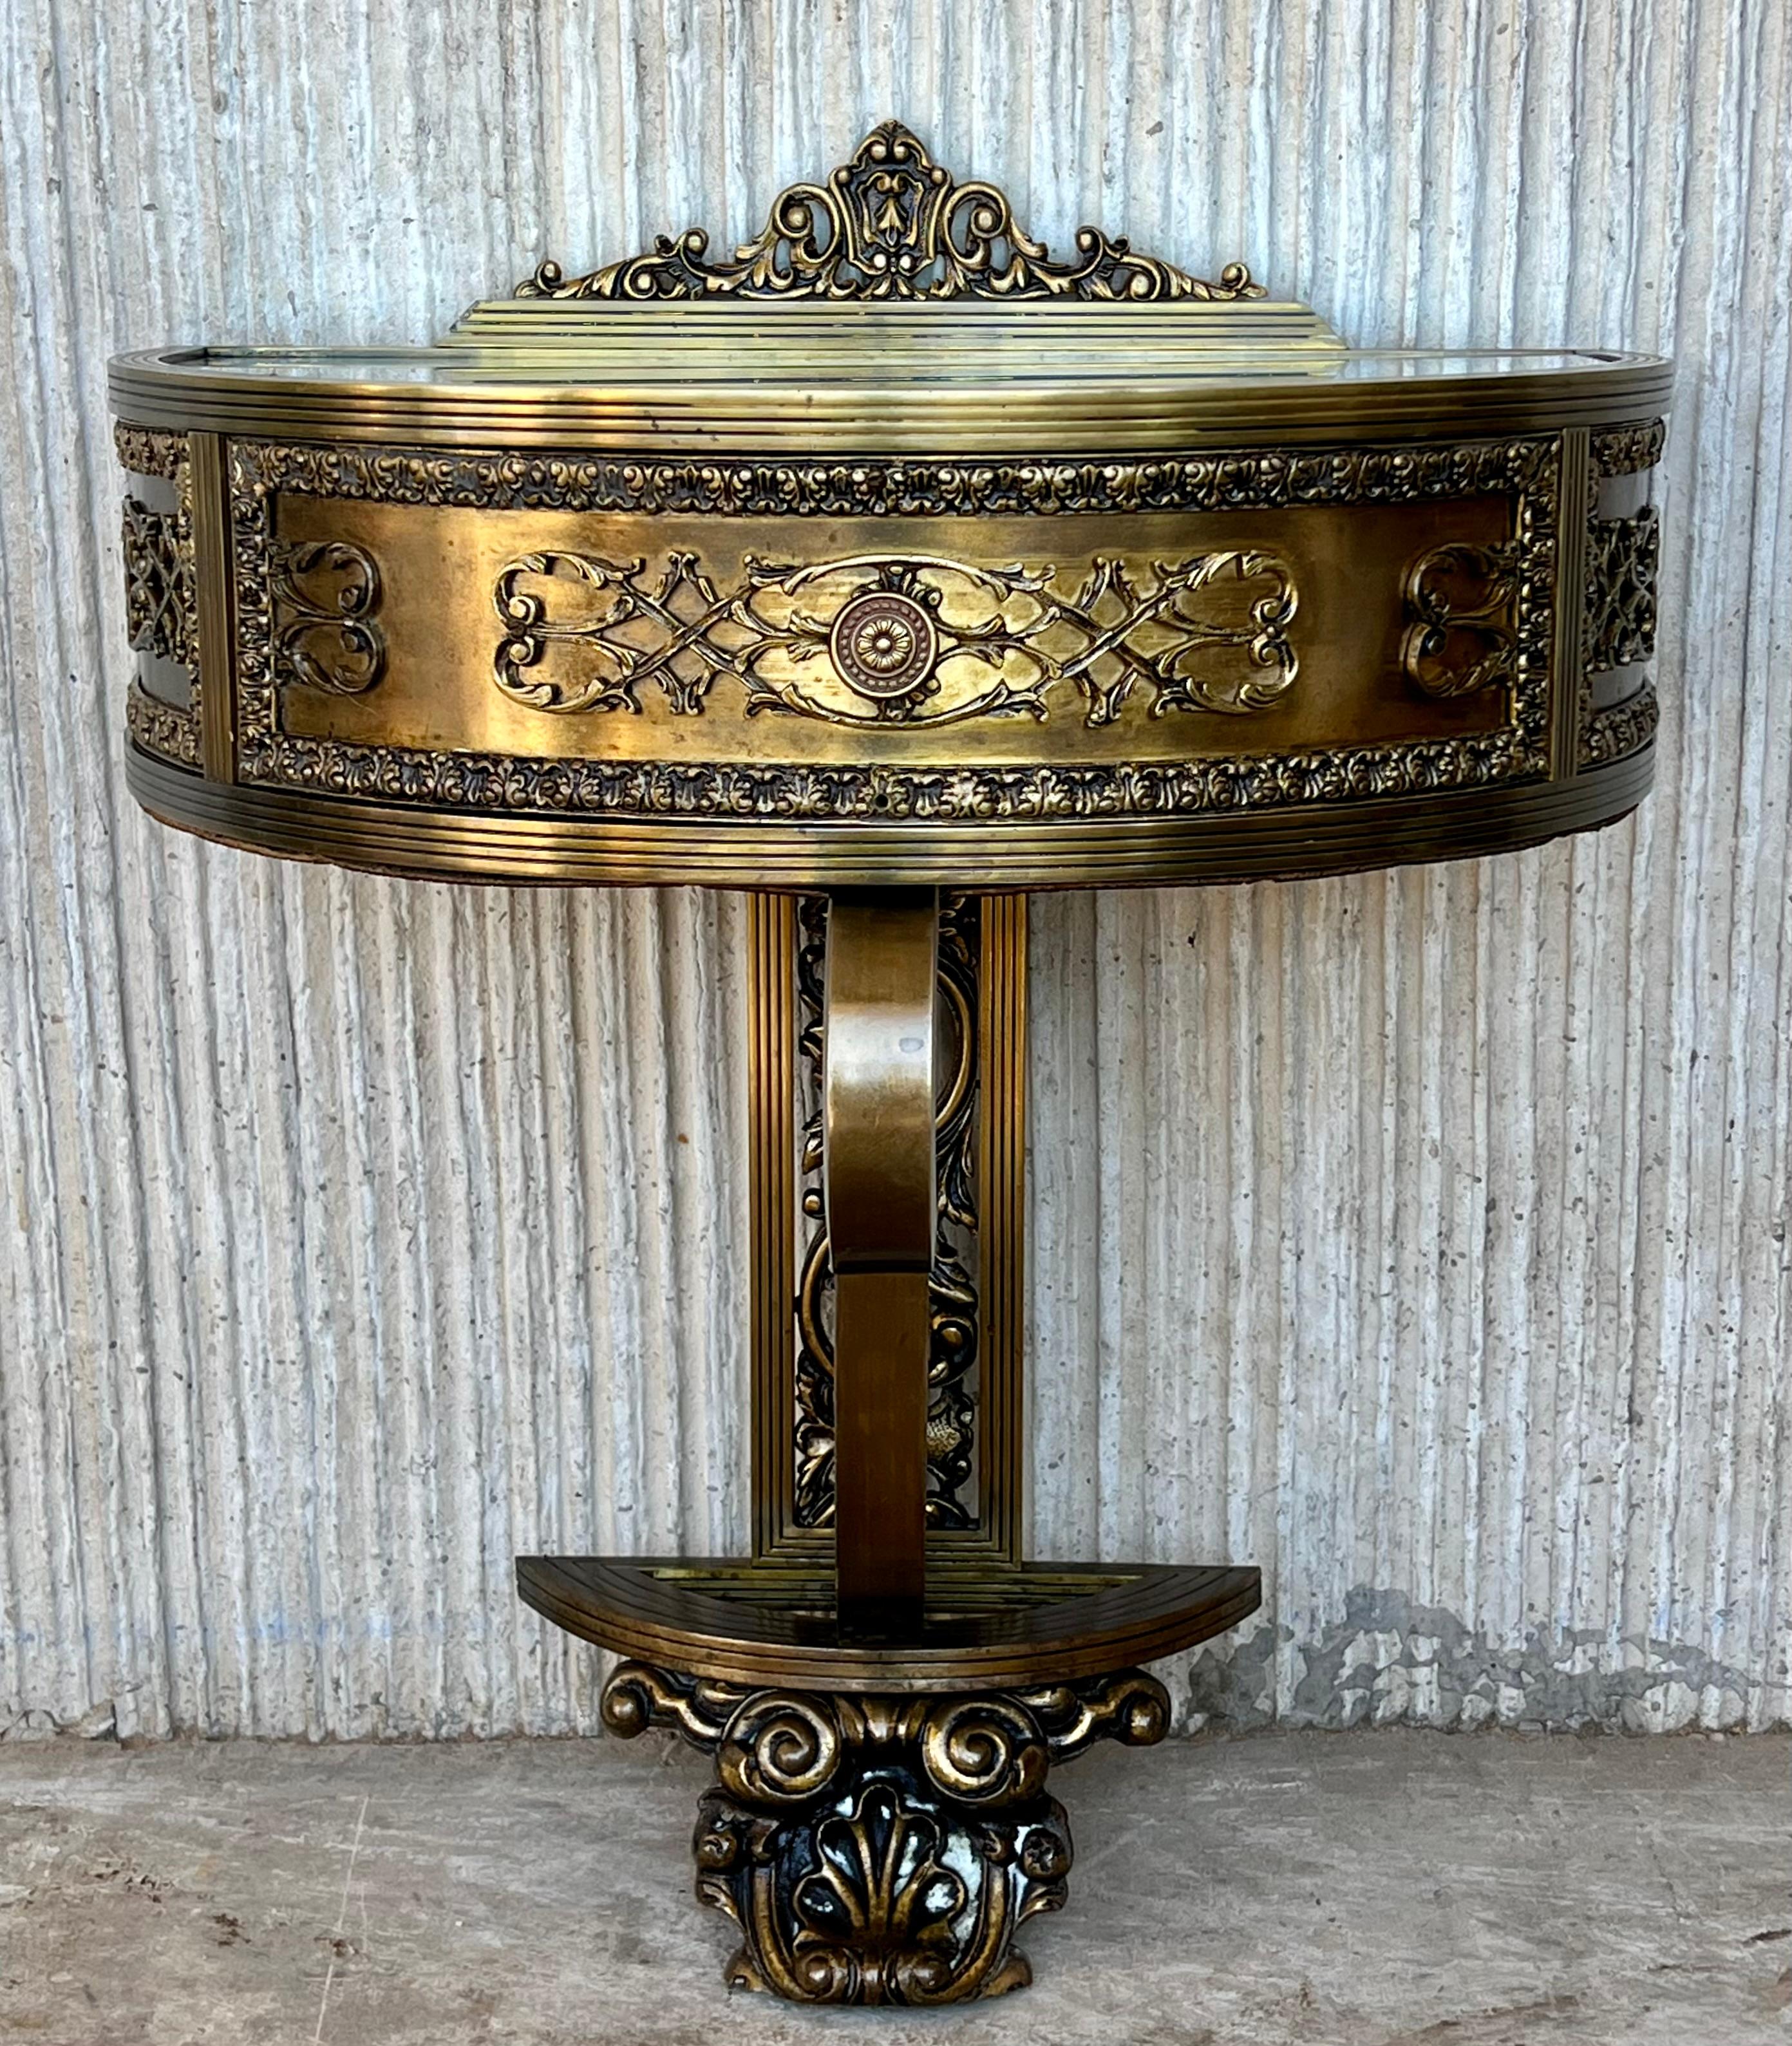 Pair of 19th century bronze and mirror bedside tables with a central drawer and two side drawers.

These late 19th century Belle Époque bronze and mirror glass cabinets or nightstands are simply stunning and built to the highest standard. The